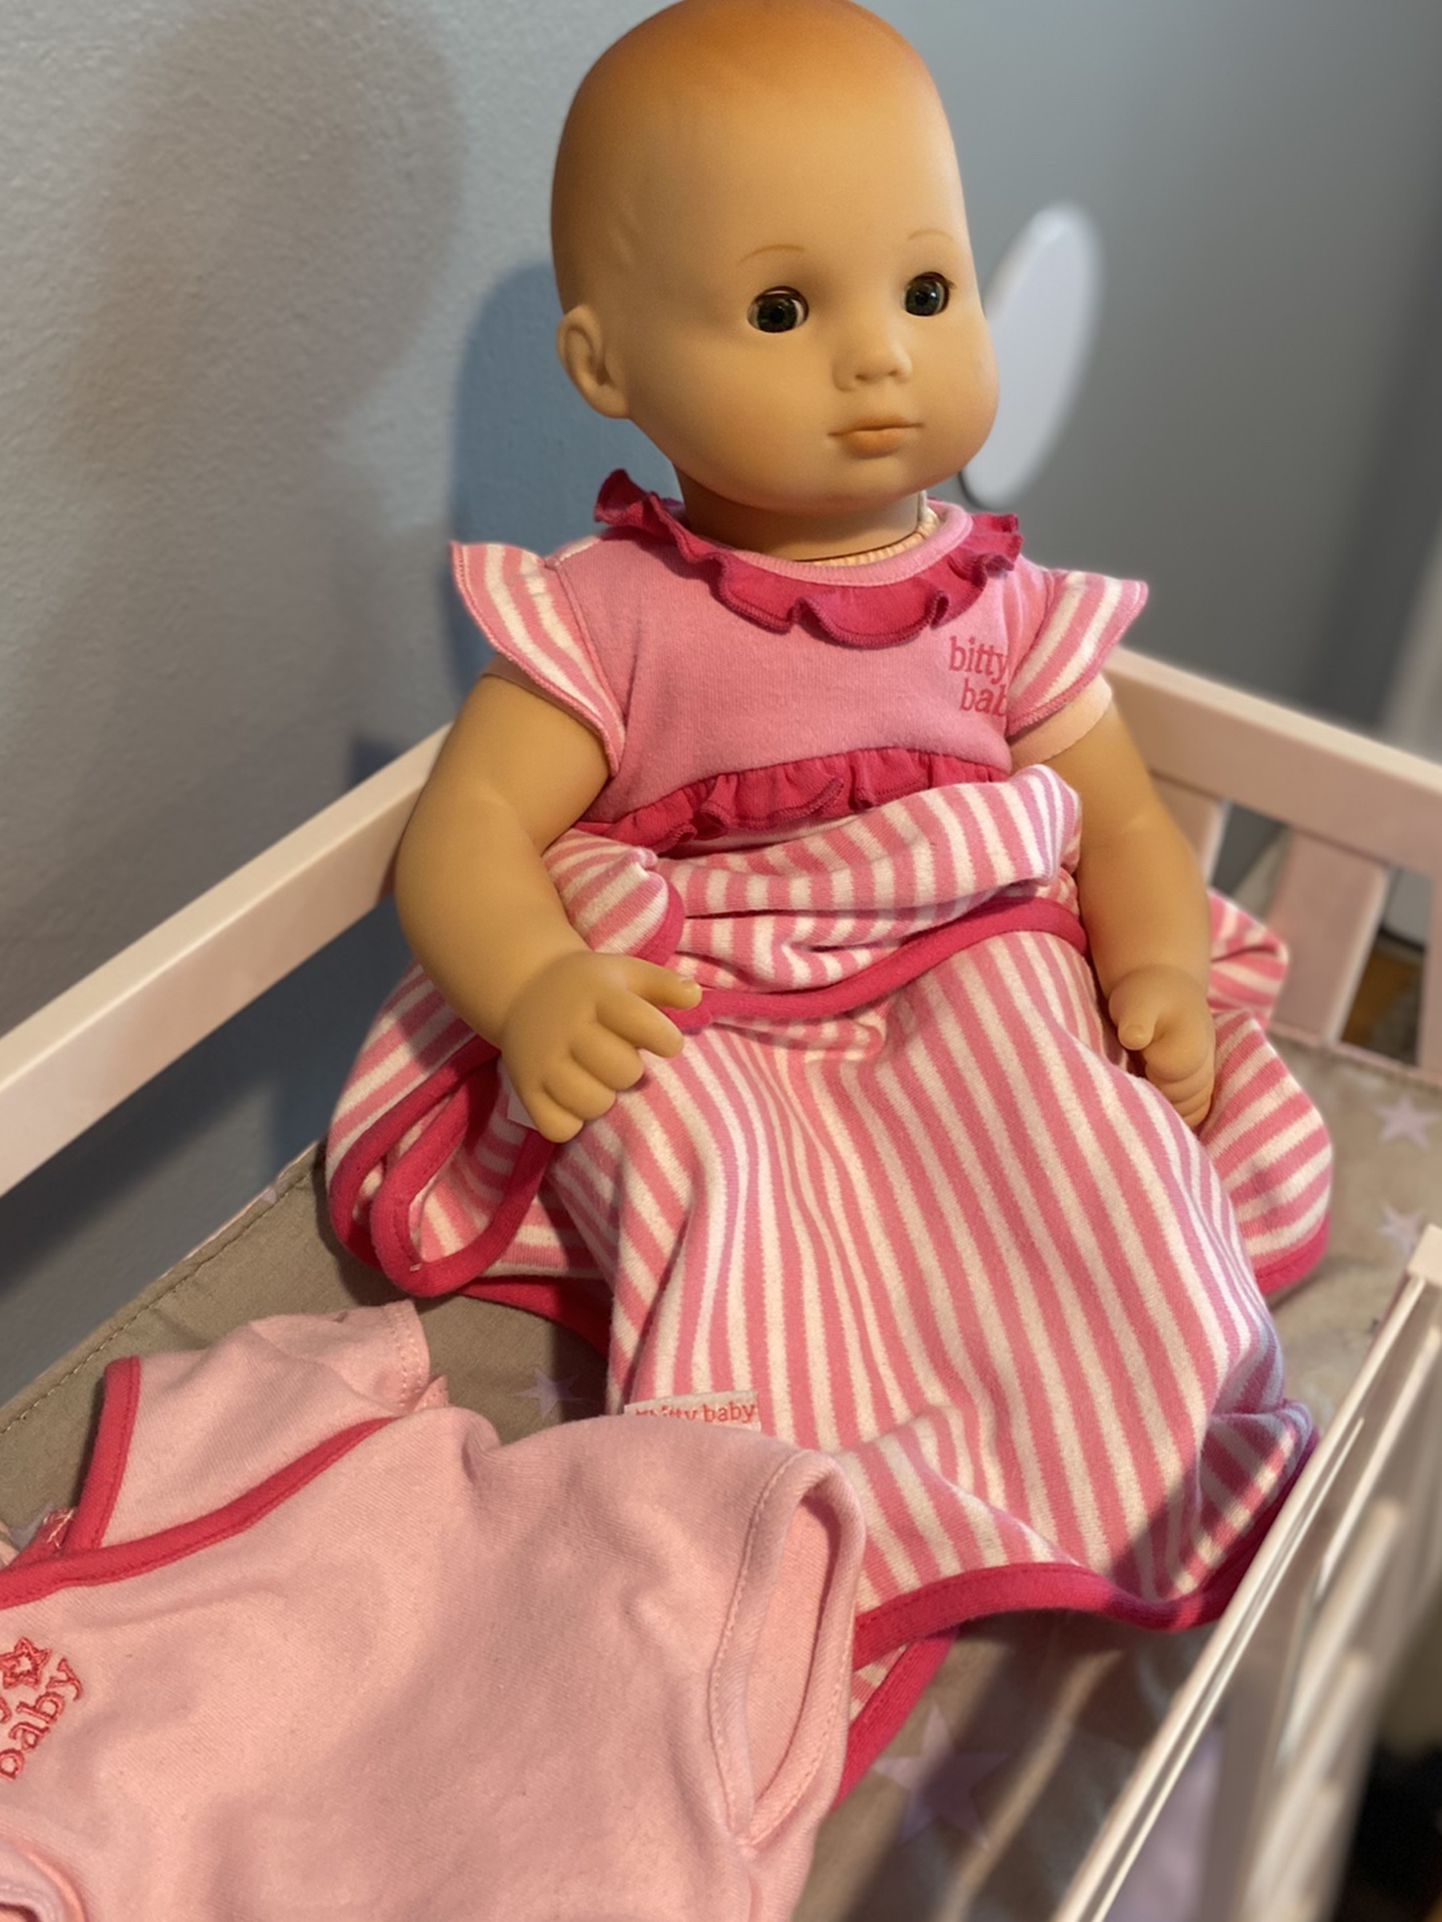 Bitty Baby Doll #2 For Sale